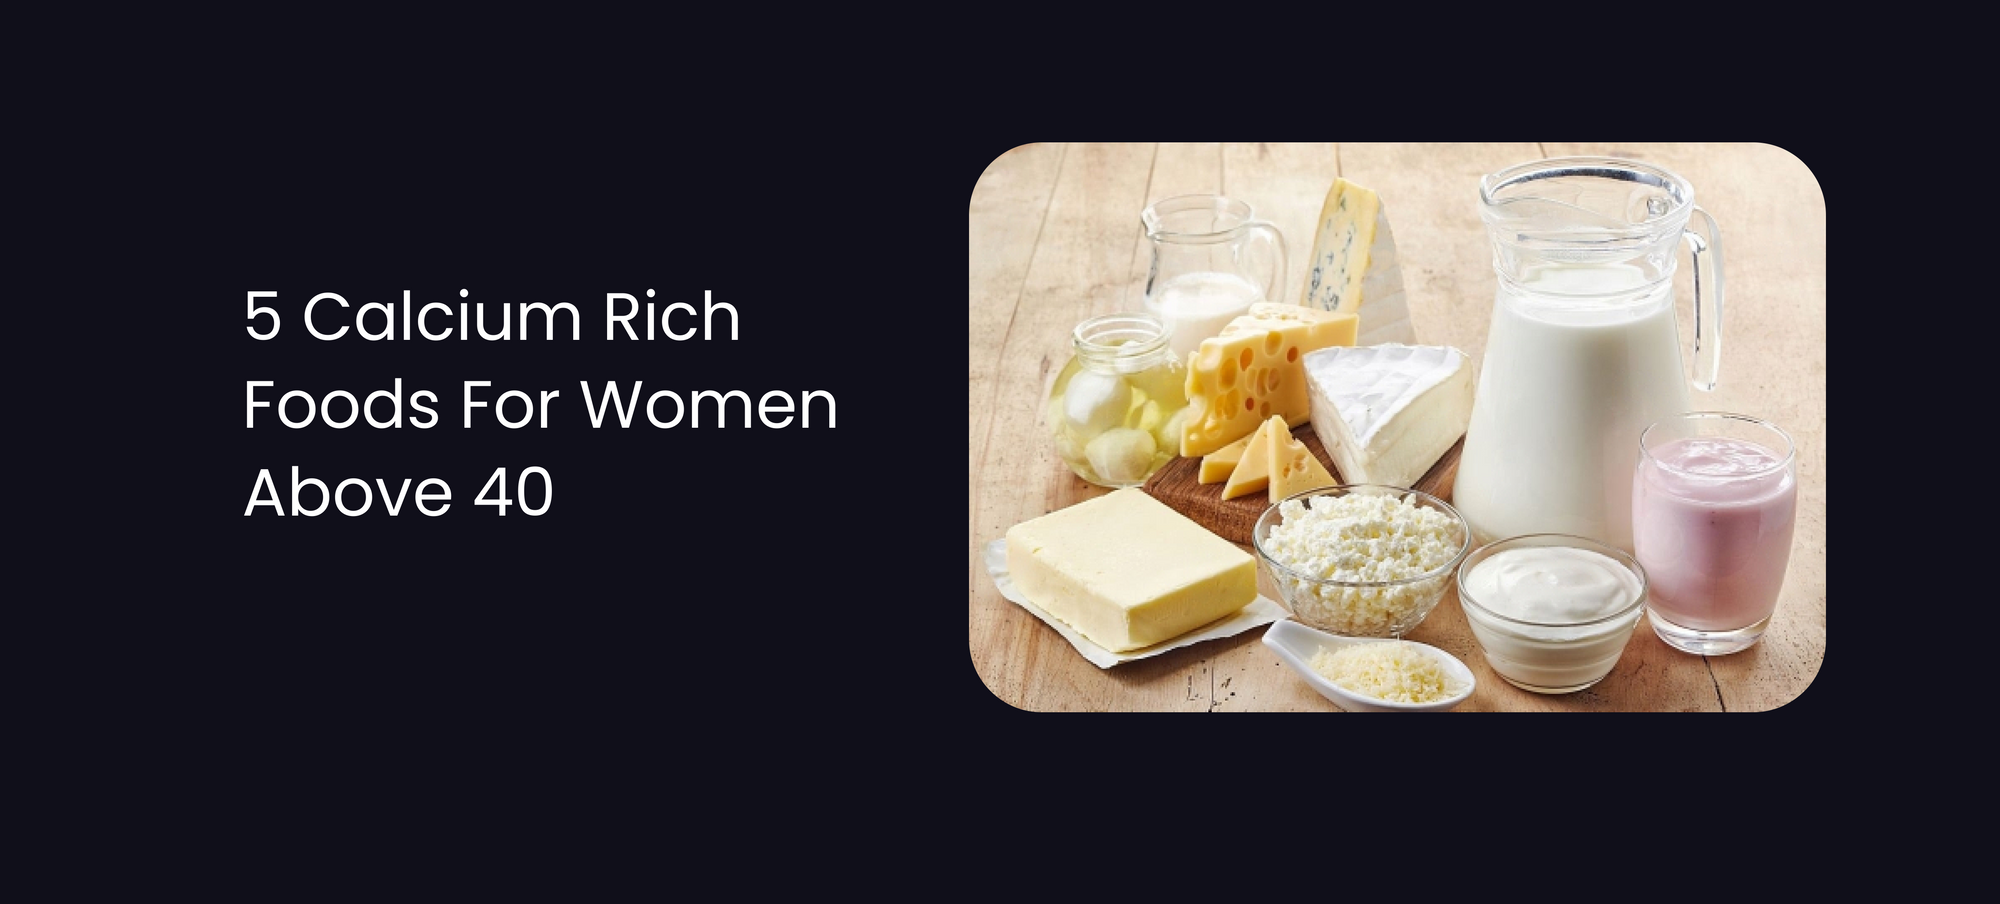 5 Calcium Rich Foods For Women Above 40